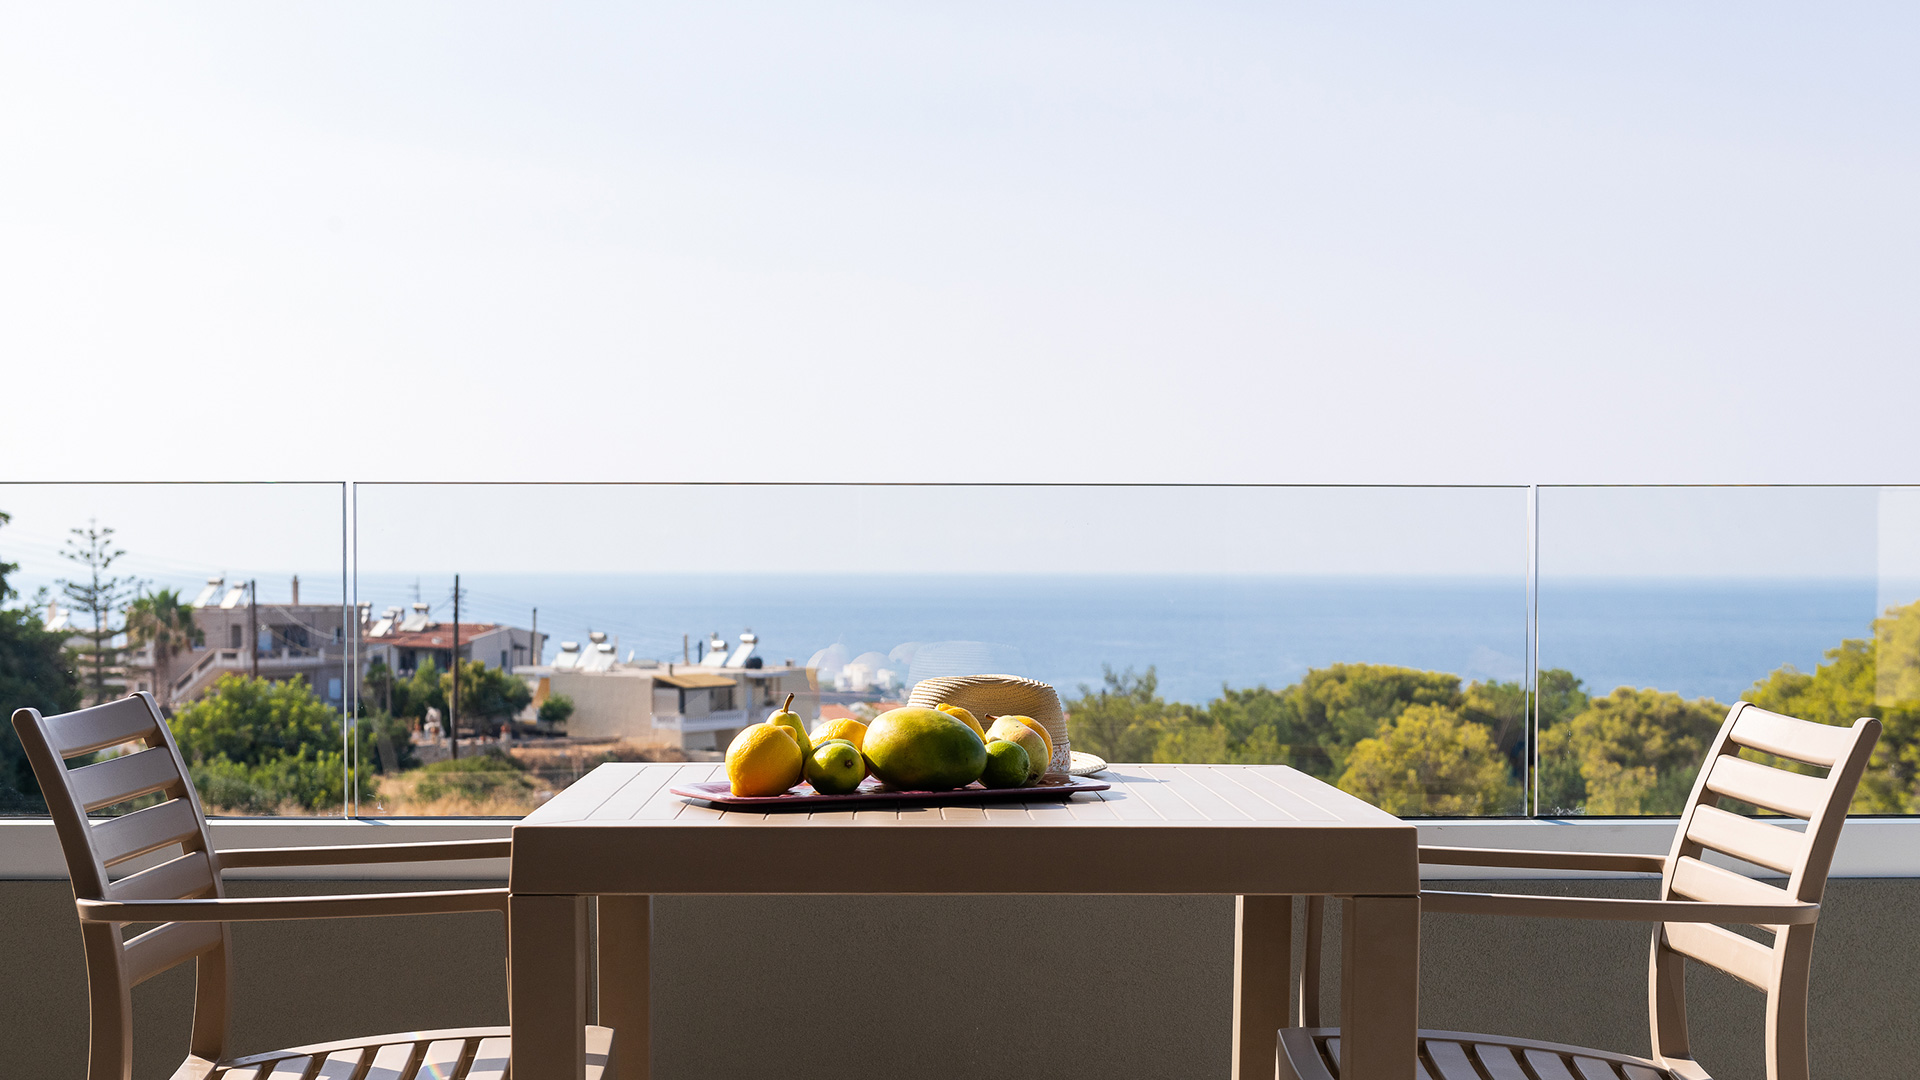 Fruits on the balcony's table with sea view